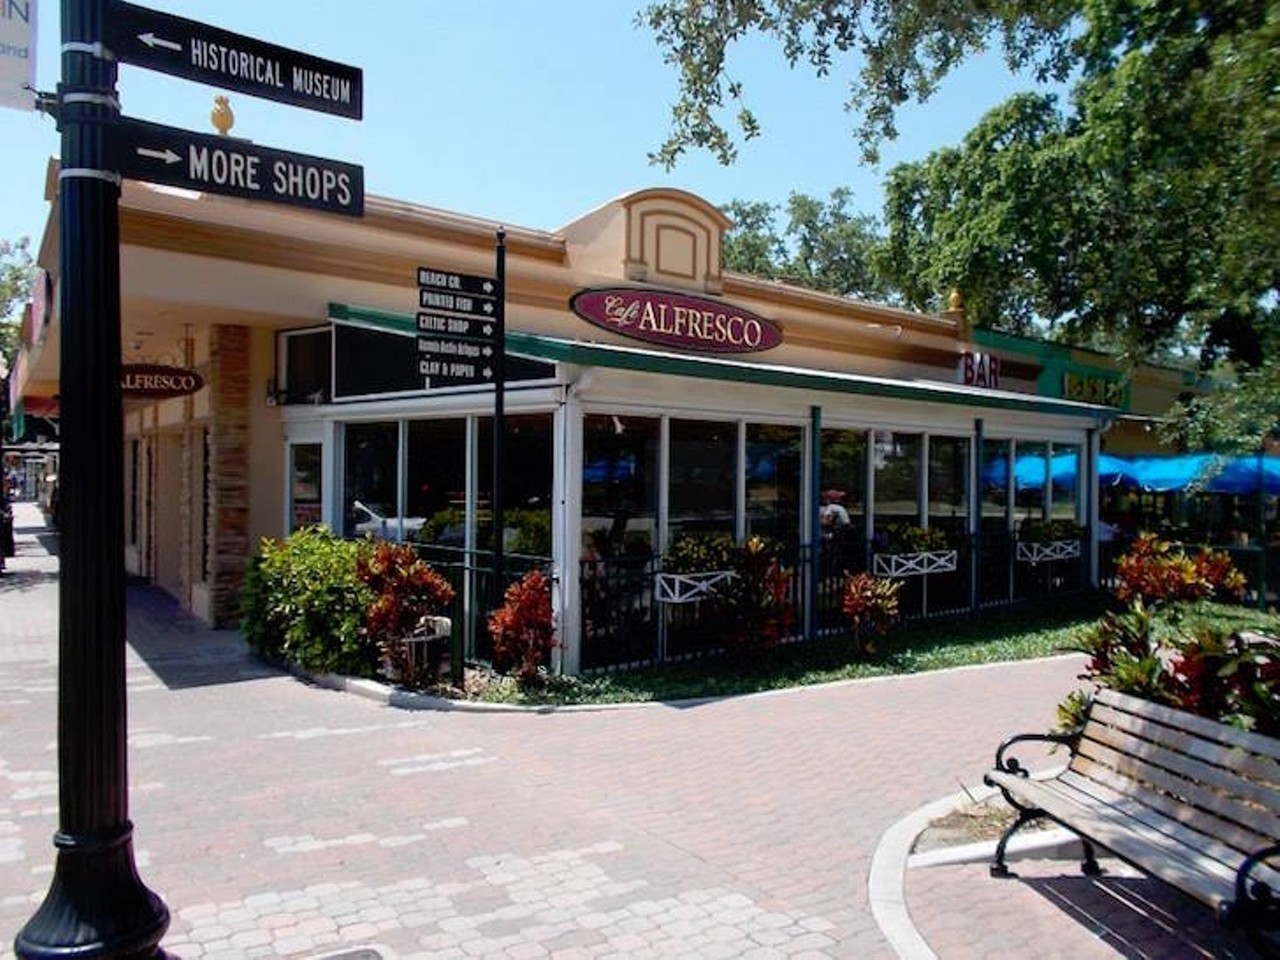  Cafe Alfresco  
344 Main St, Dunedin, FL 34698 ,(727) 736-4299  
A large, open air dining patio and friendly waiters will greet you upon arrival at Cafe Alfresco. A Dunedin gem and local favorite, this spot has go-to neighborhood haunt written all over it.  
Photo via Cafe Alfresco/Facebook